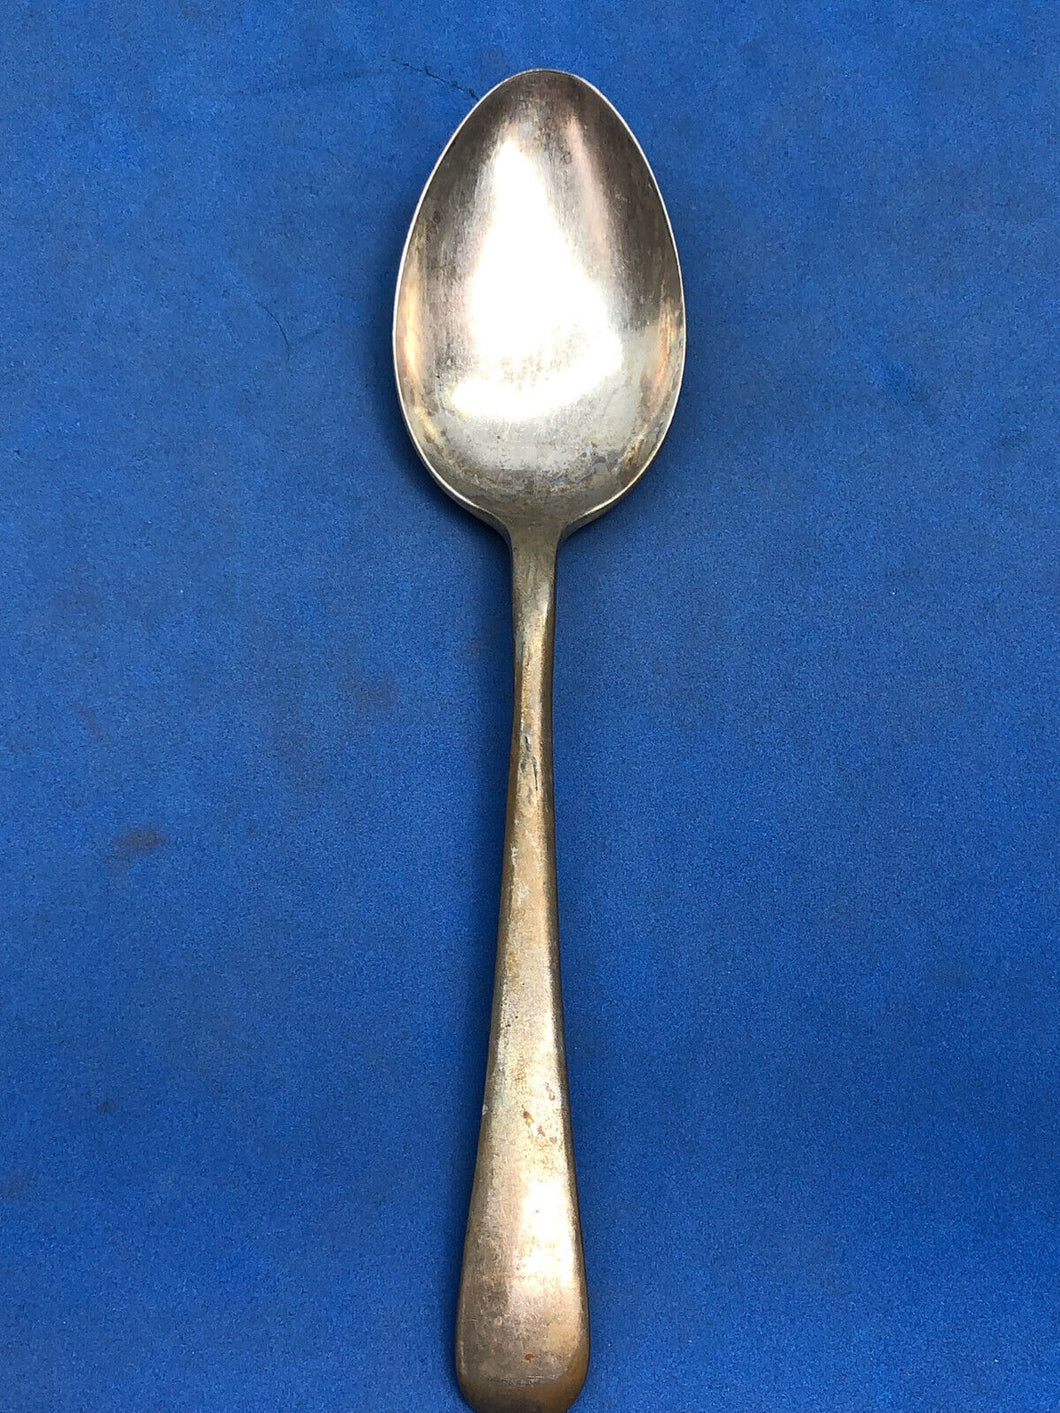 Original WW2 British Army Officers Mess WD Marked Cutlery Spoon - 1939